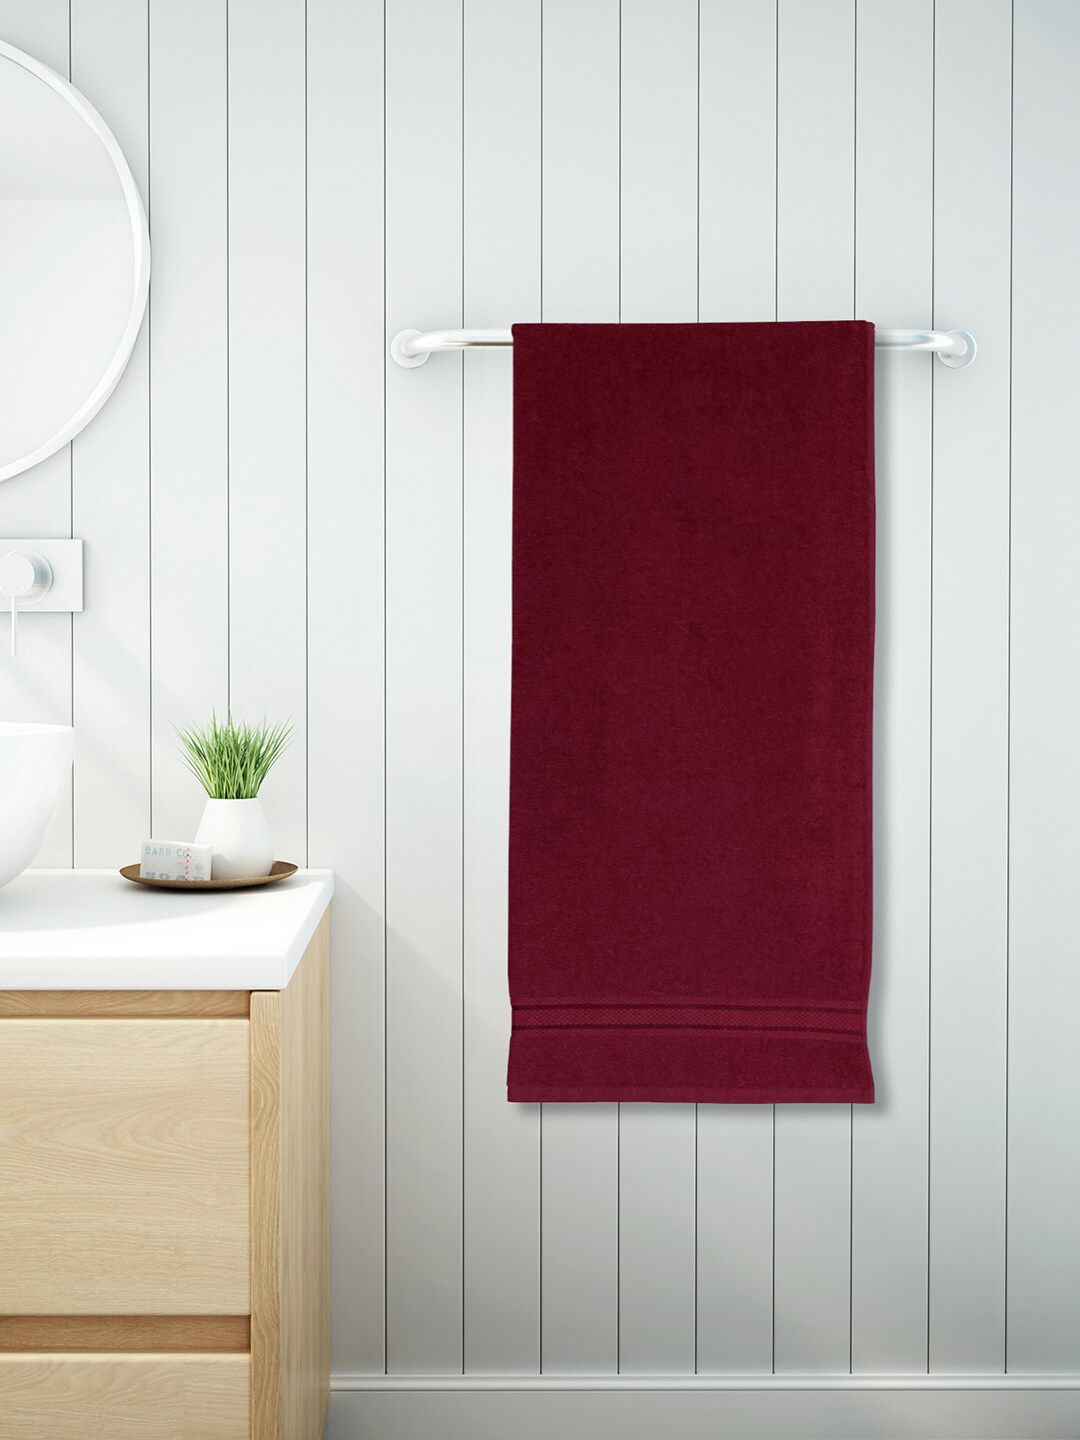 SPACES Maroon Solid 400GSM Pure Cotton Bath Towel Price in India